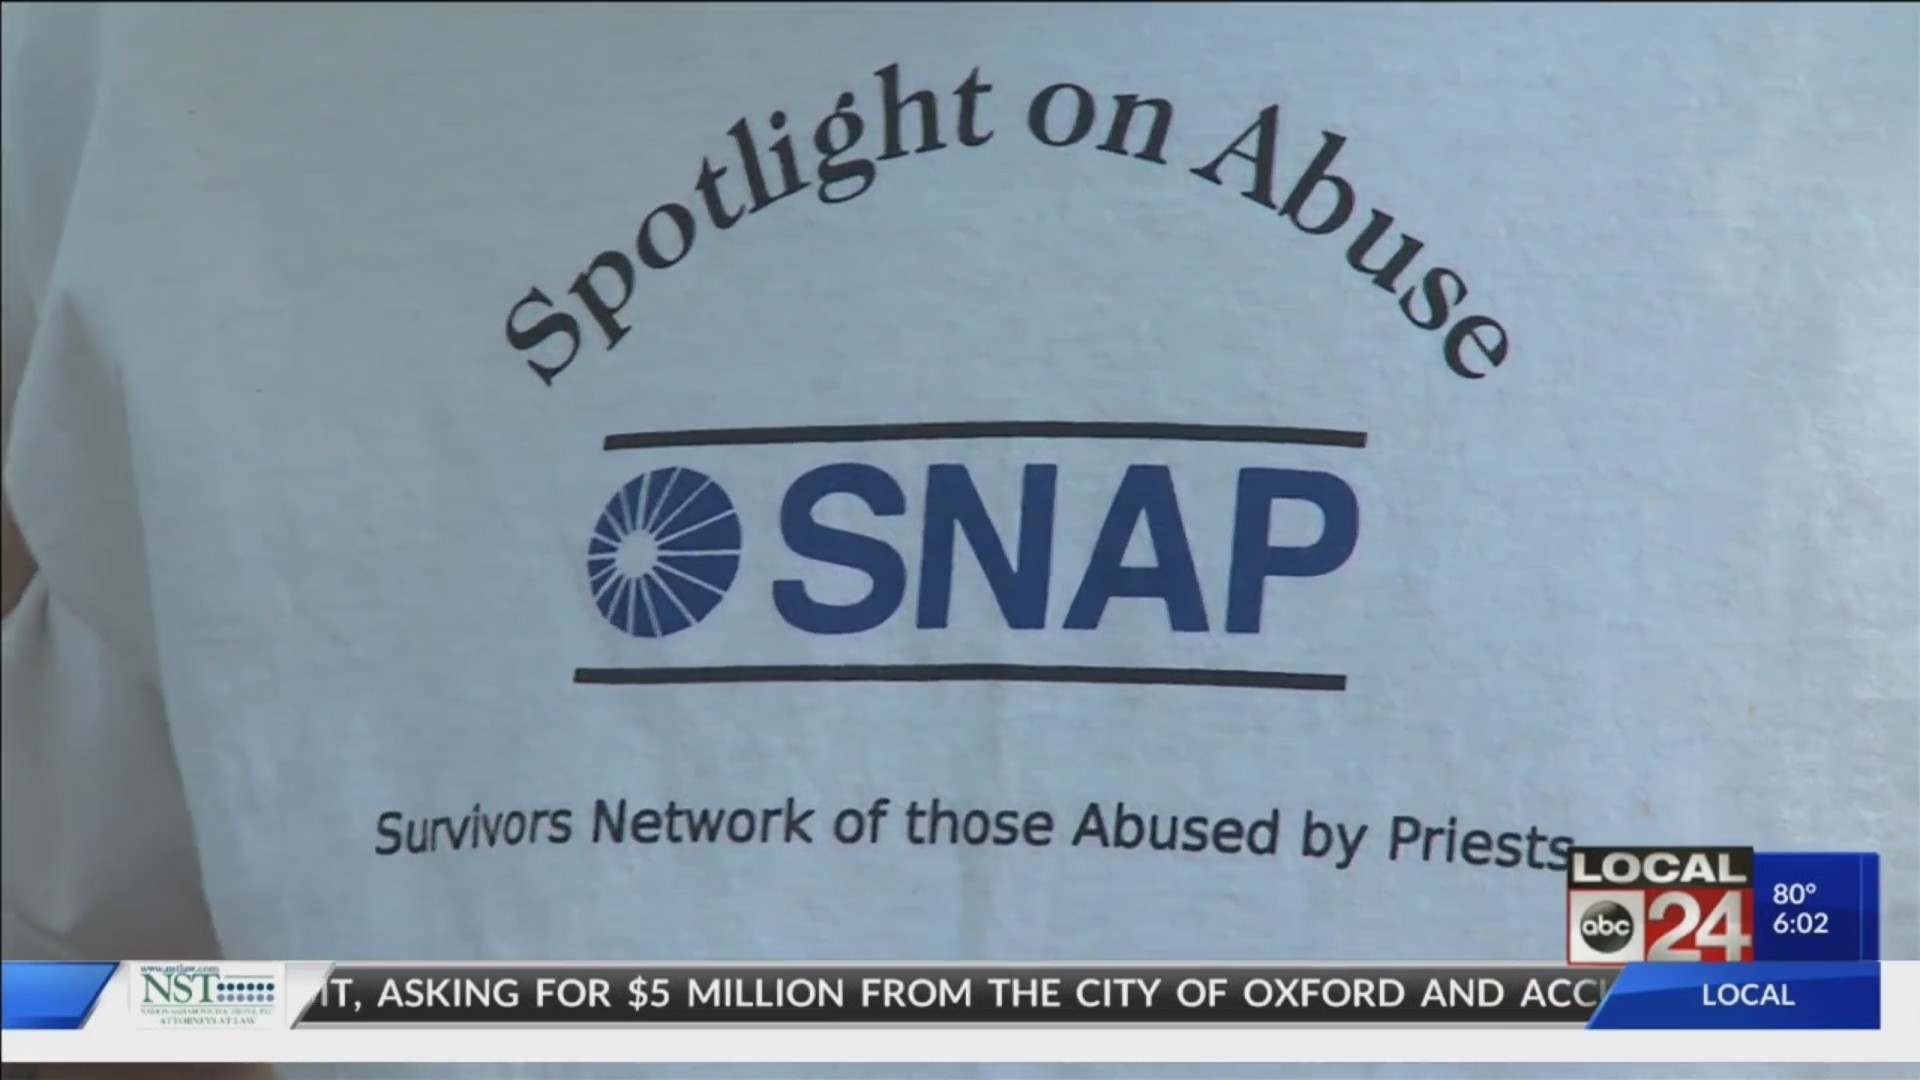 SNAP wants Memphis Catholic Diocese to name priests who are "credibly-accused" of child molestation